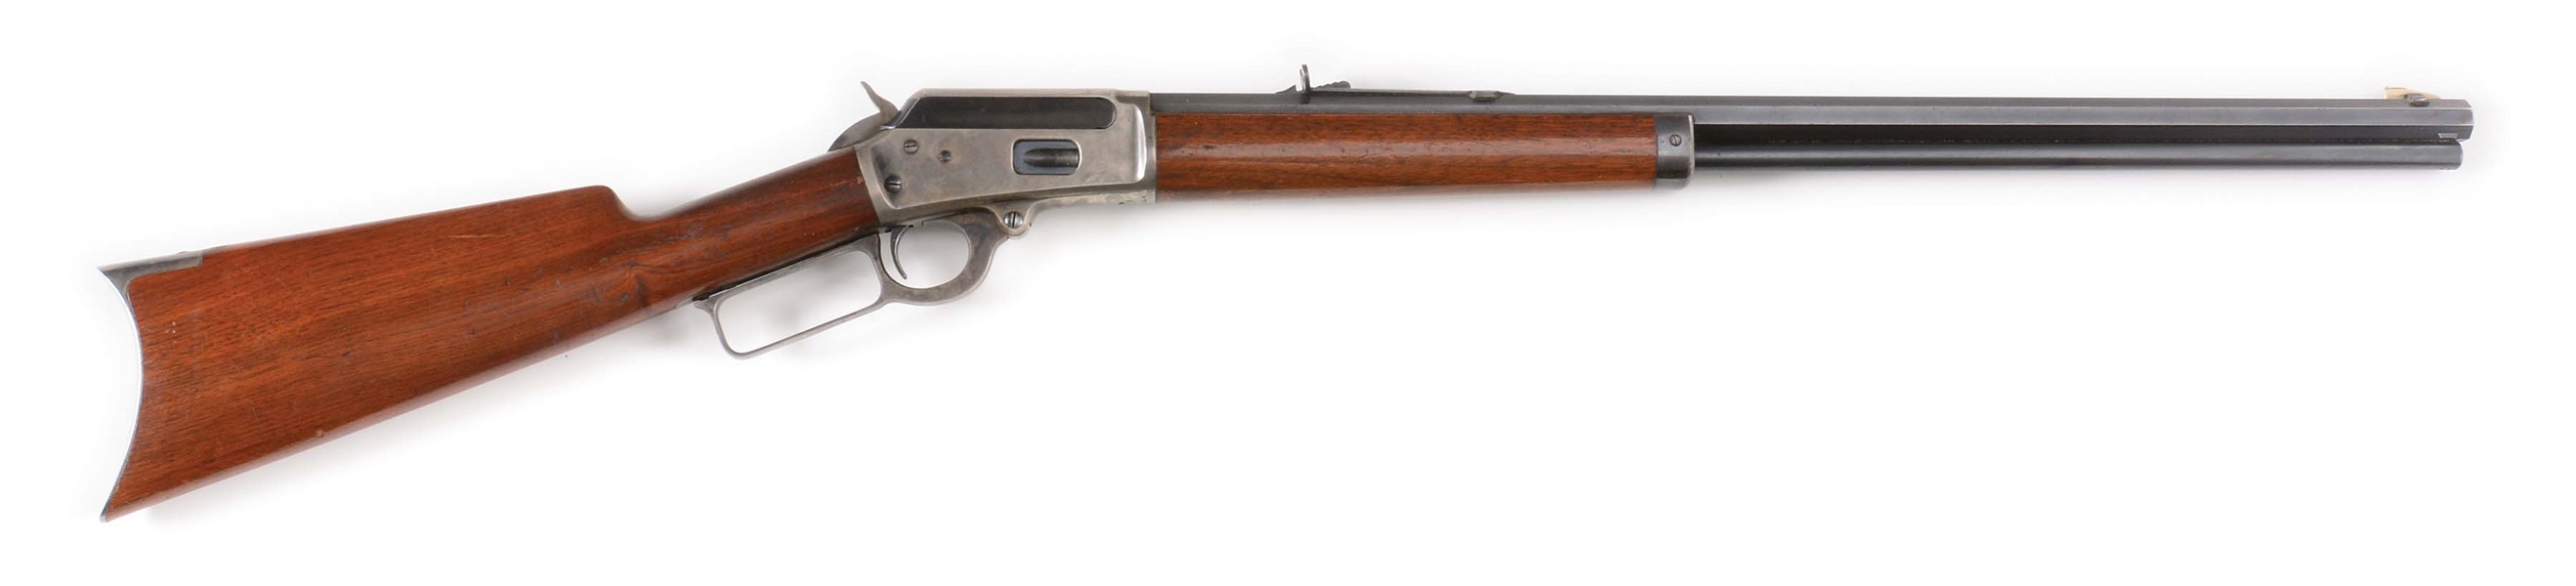 (C) MARLIN 1894 LEVER ACTION RIFLE (1903).